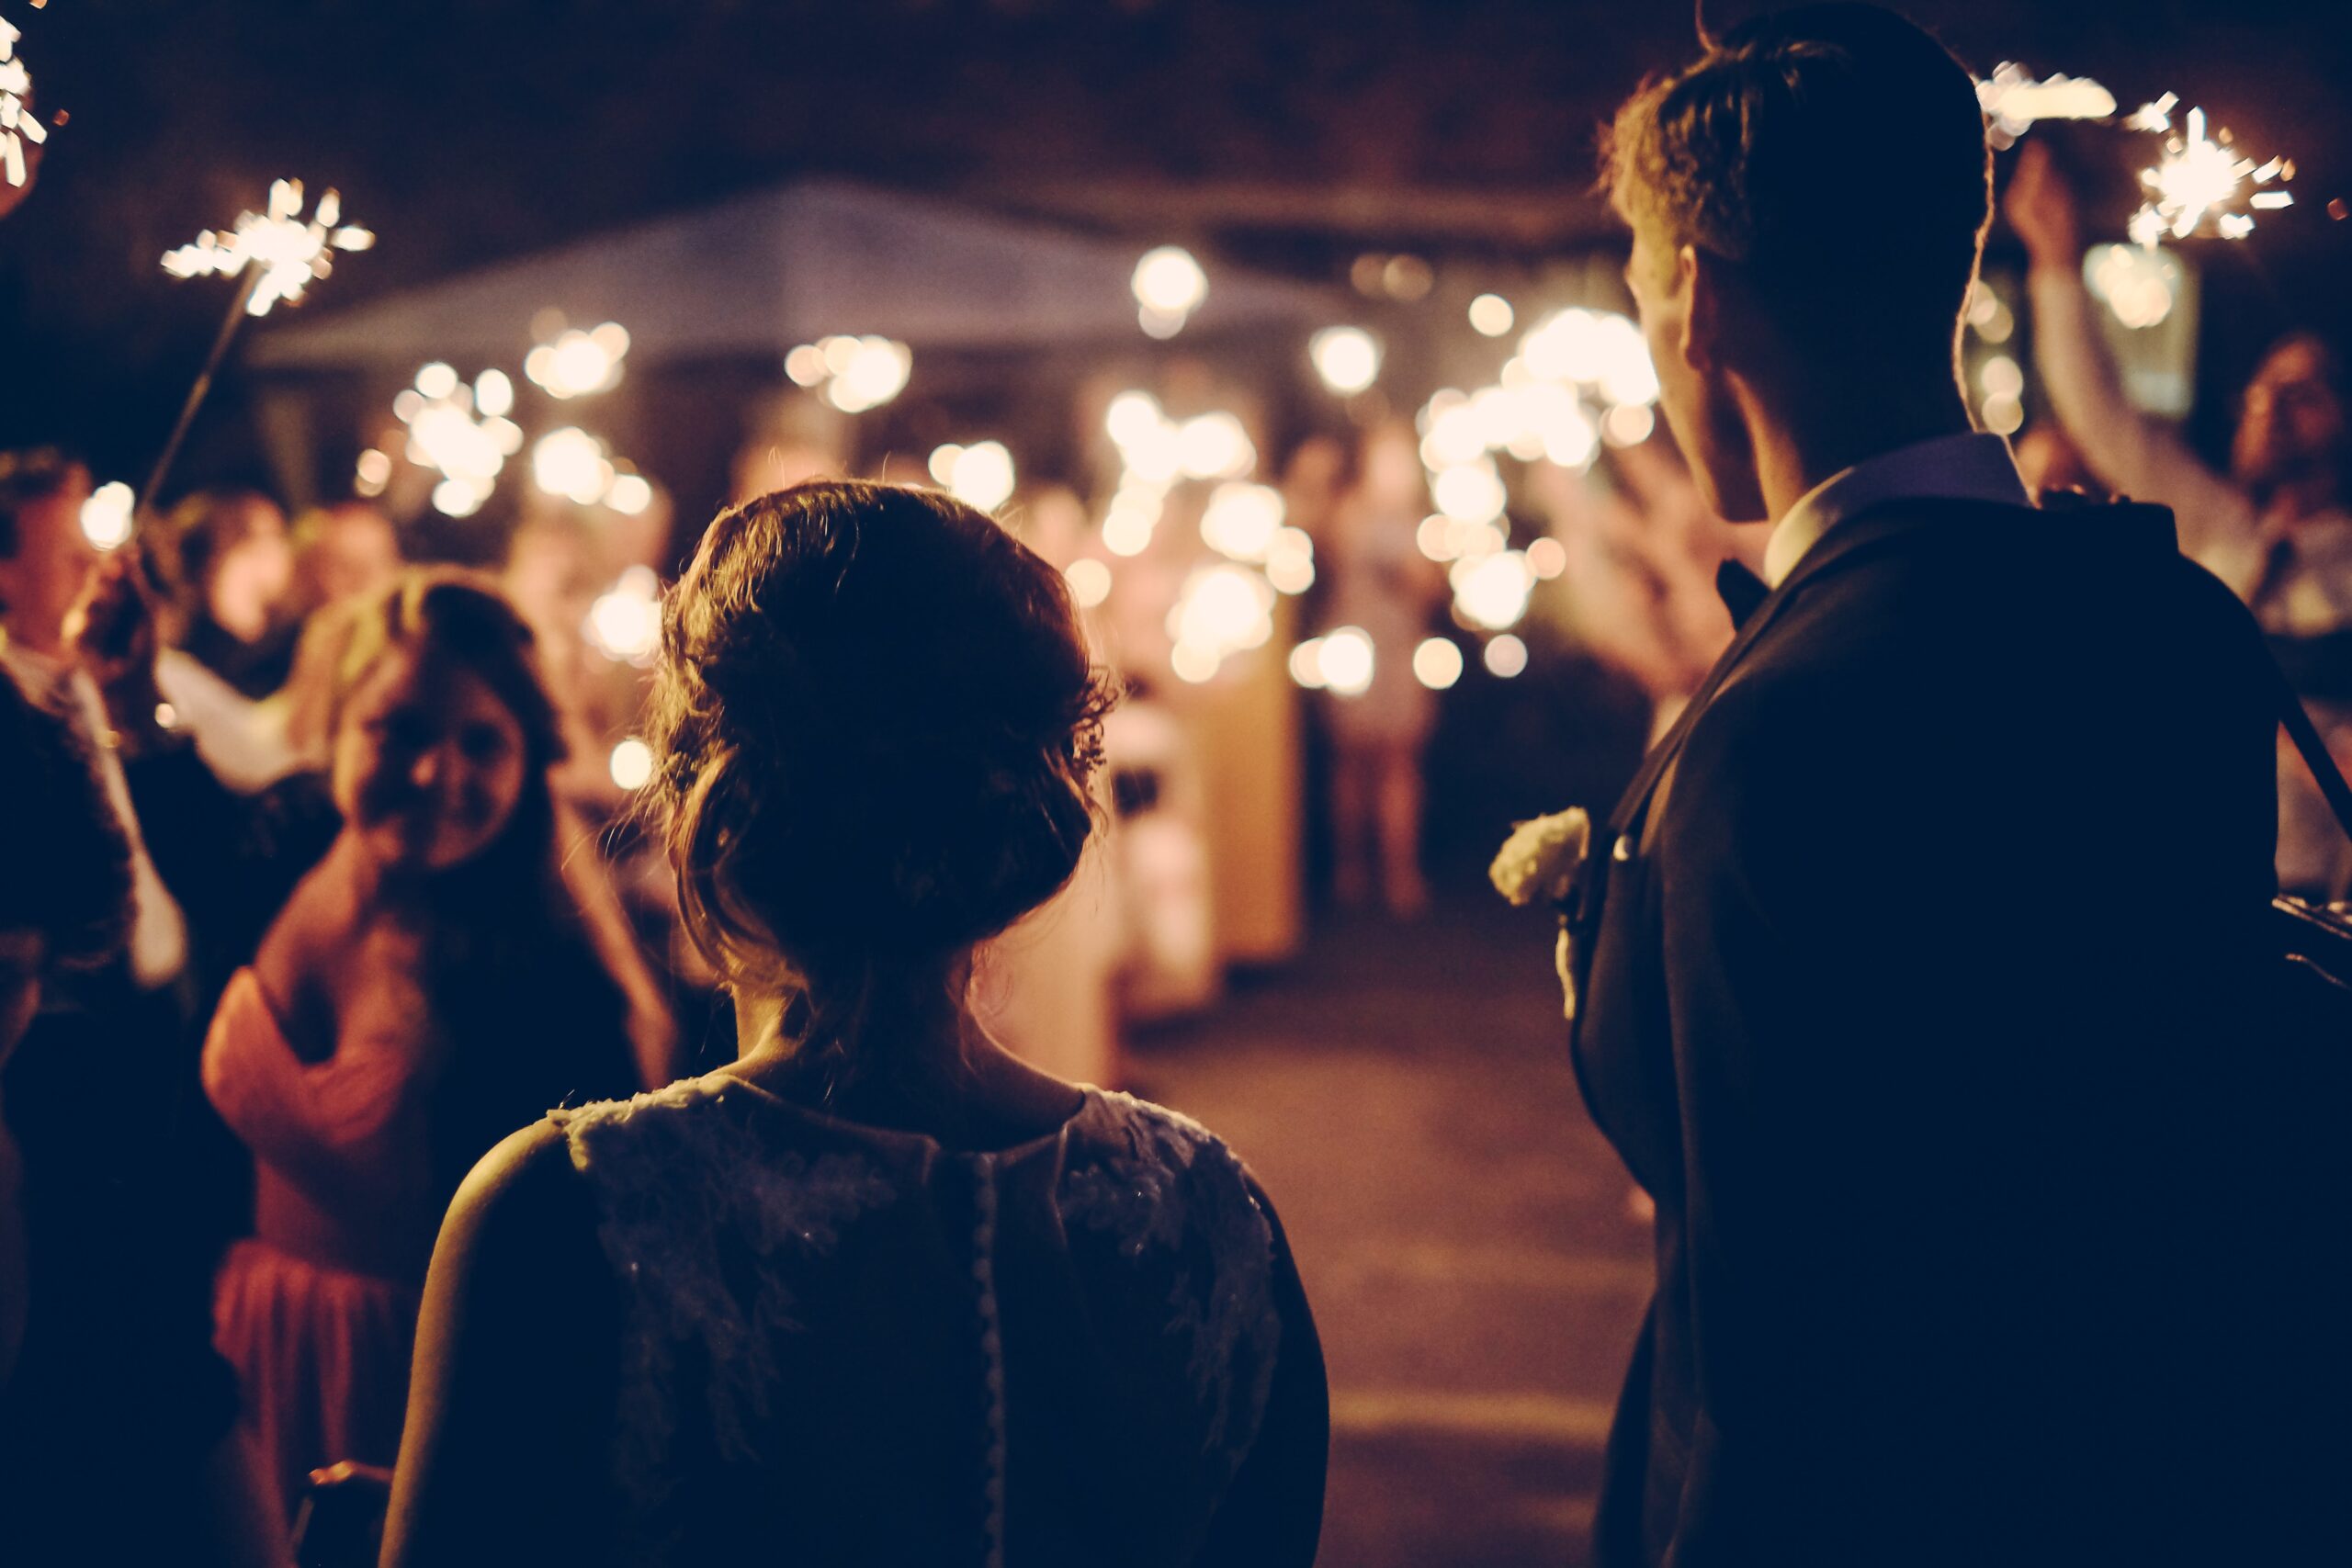 Two people look on at an outdoor nighttime wedding illuminated by sparklers.